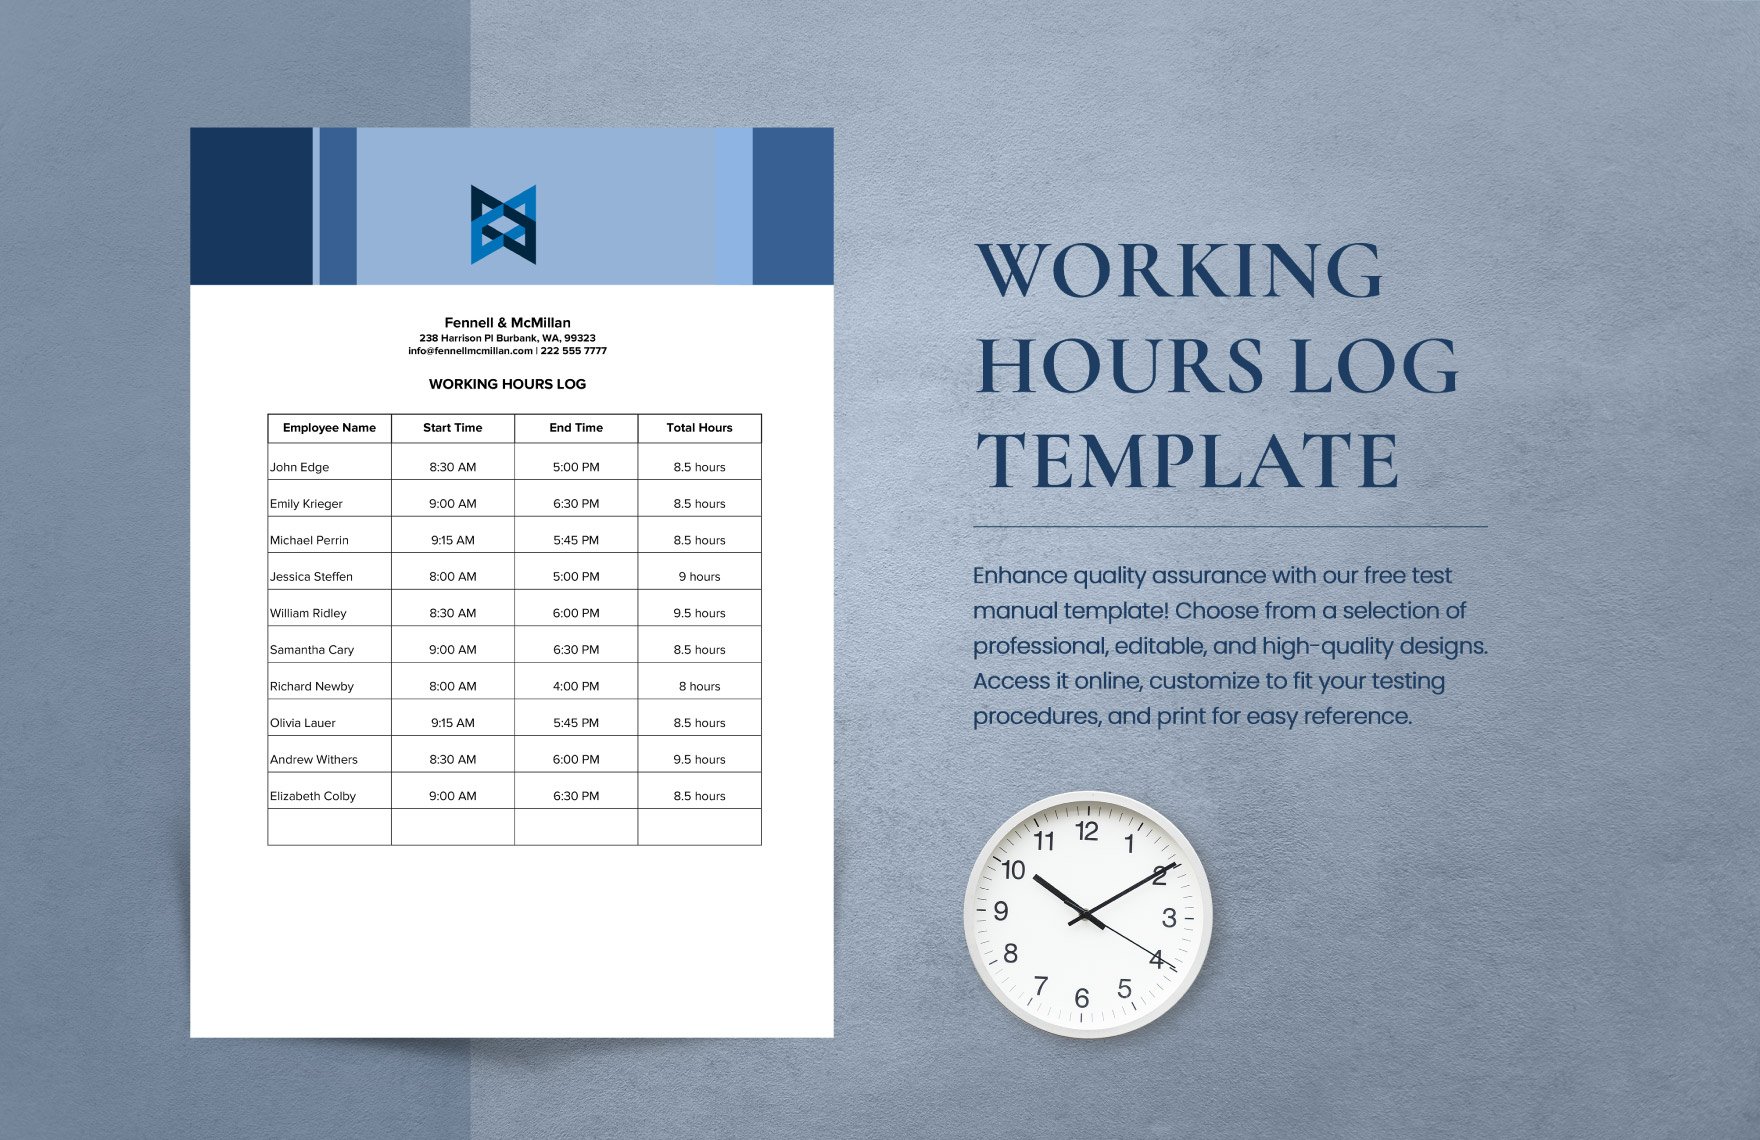 Working Hours Log Template in Word, Google Docs, PDF